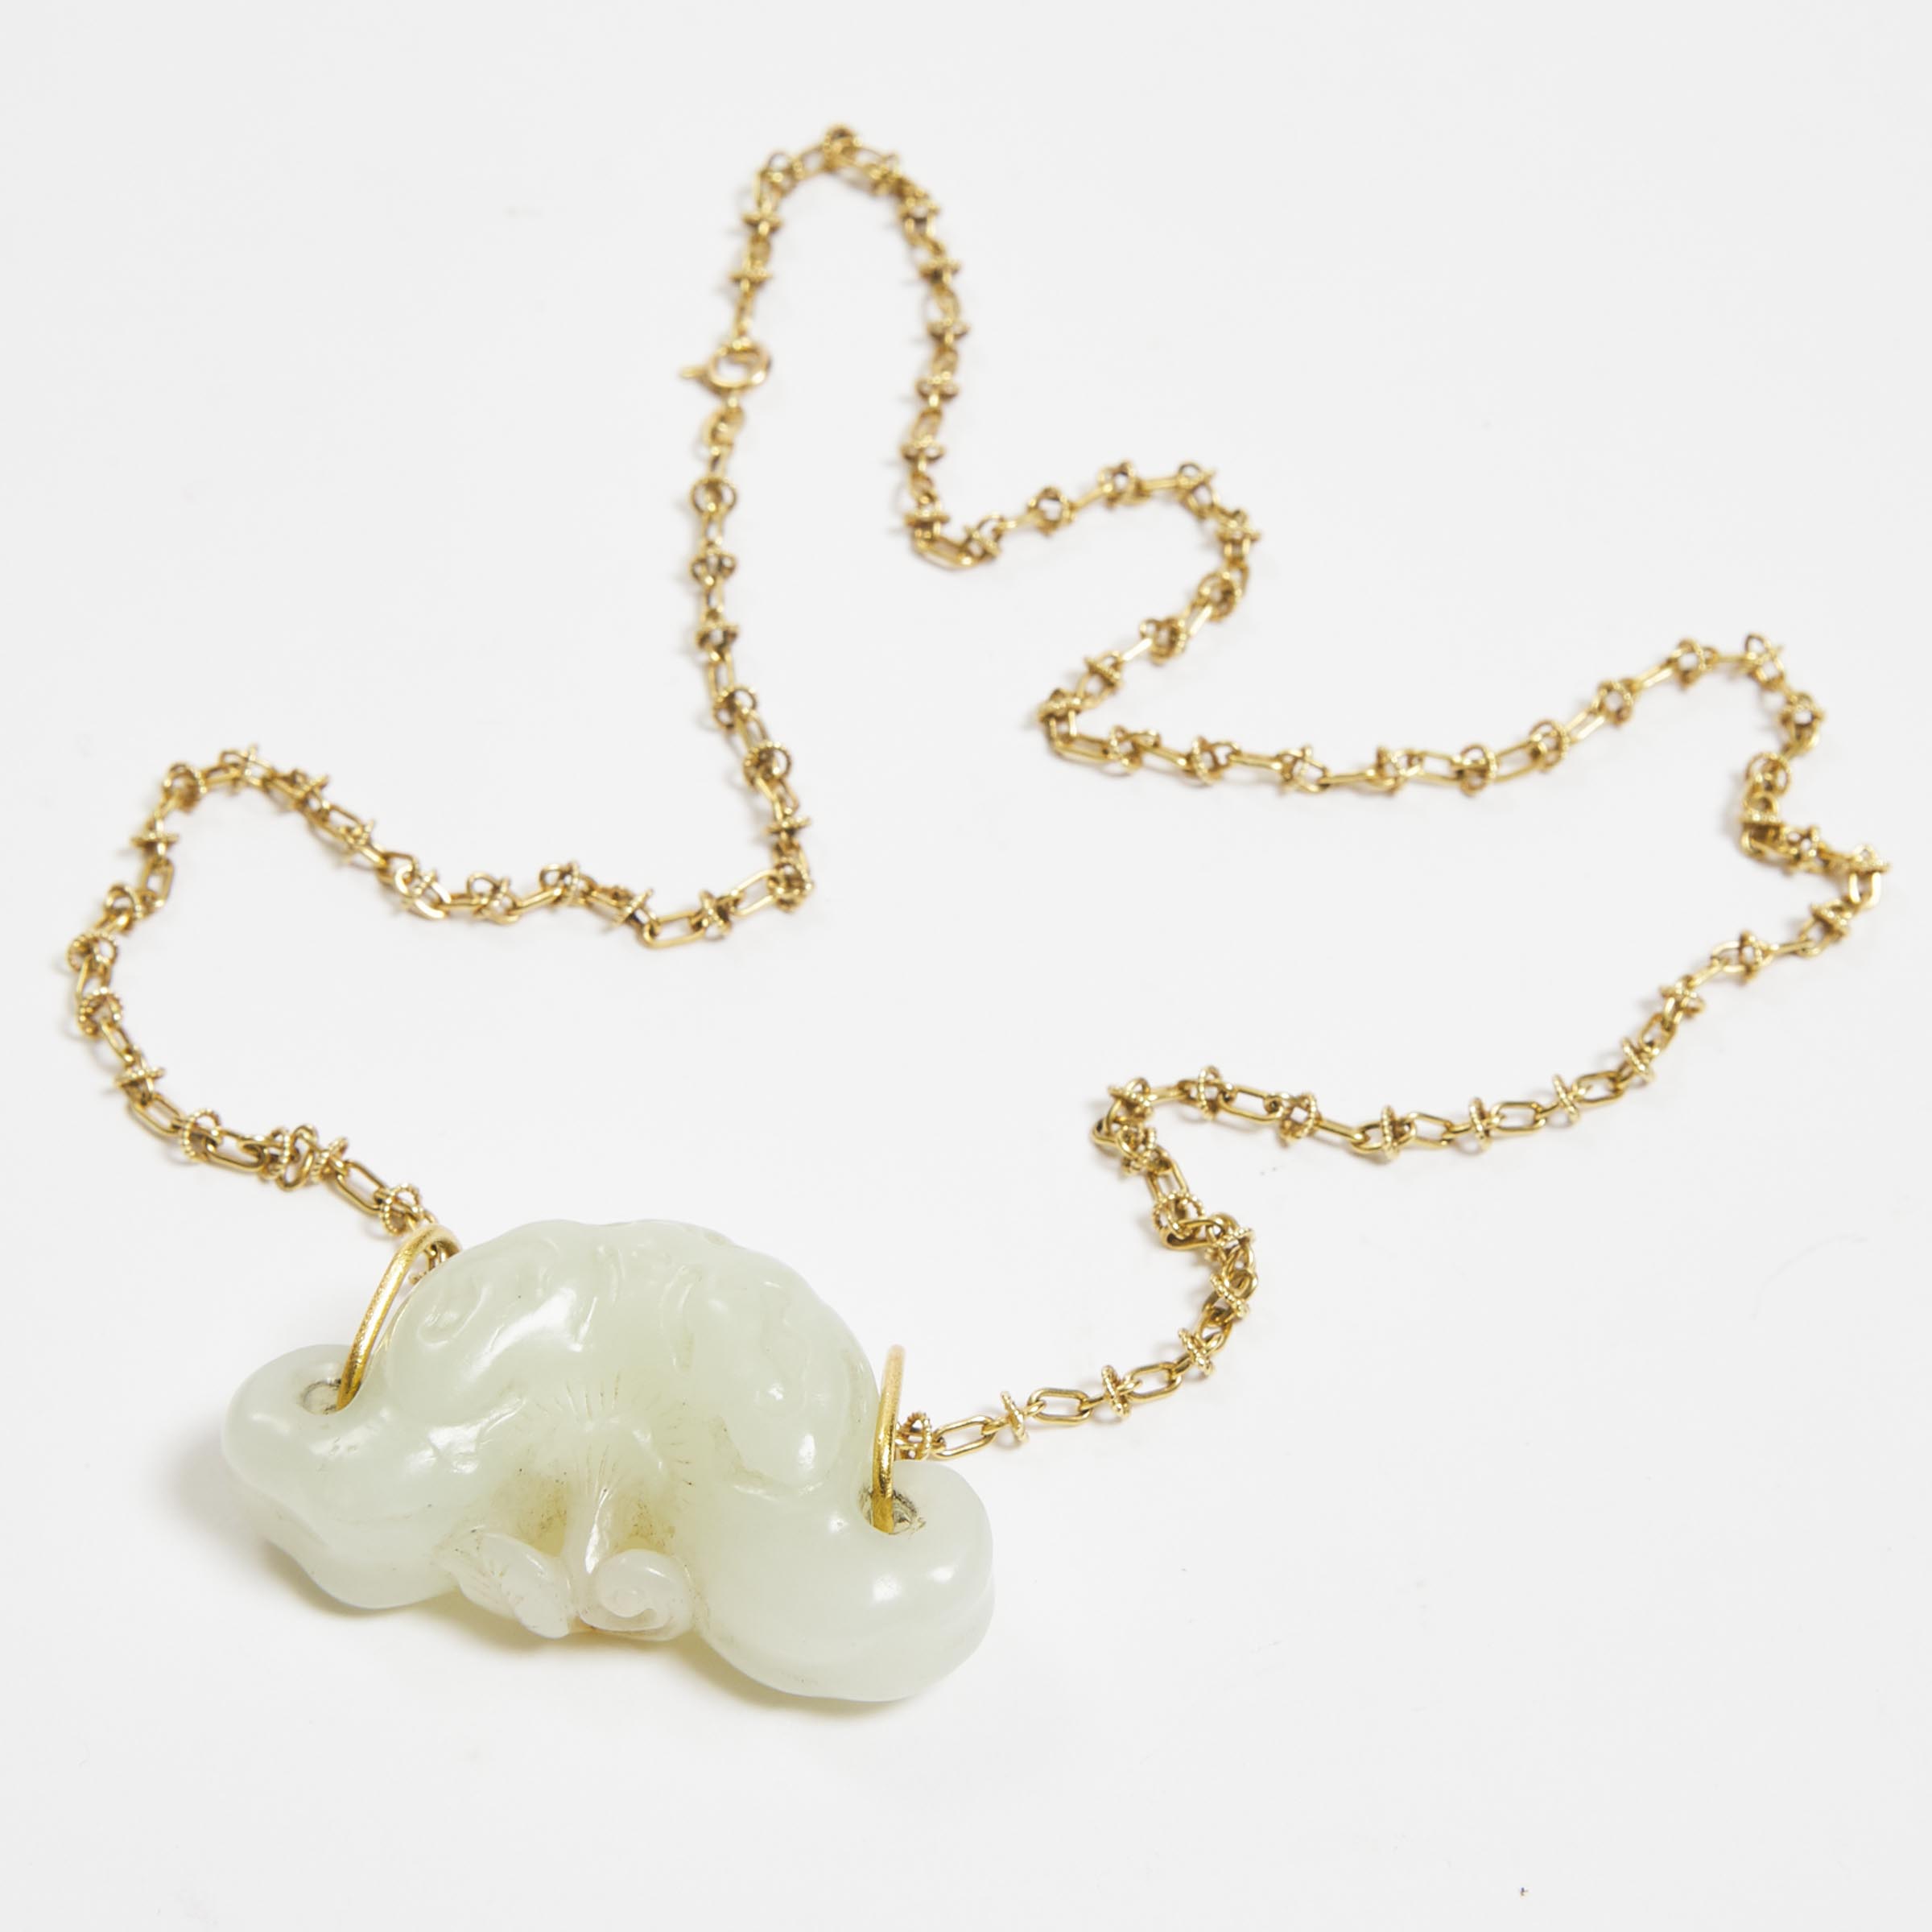 A White Jade Carving of a Water